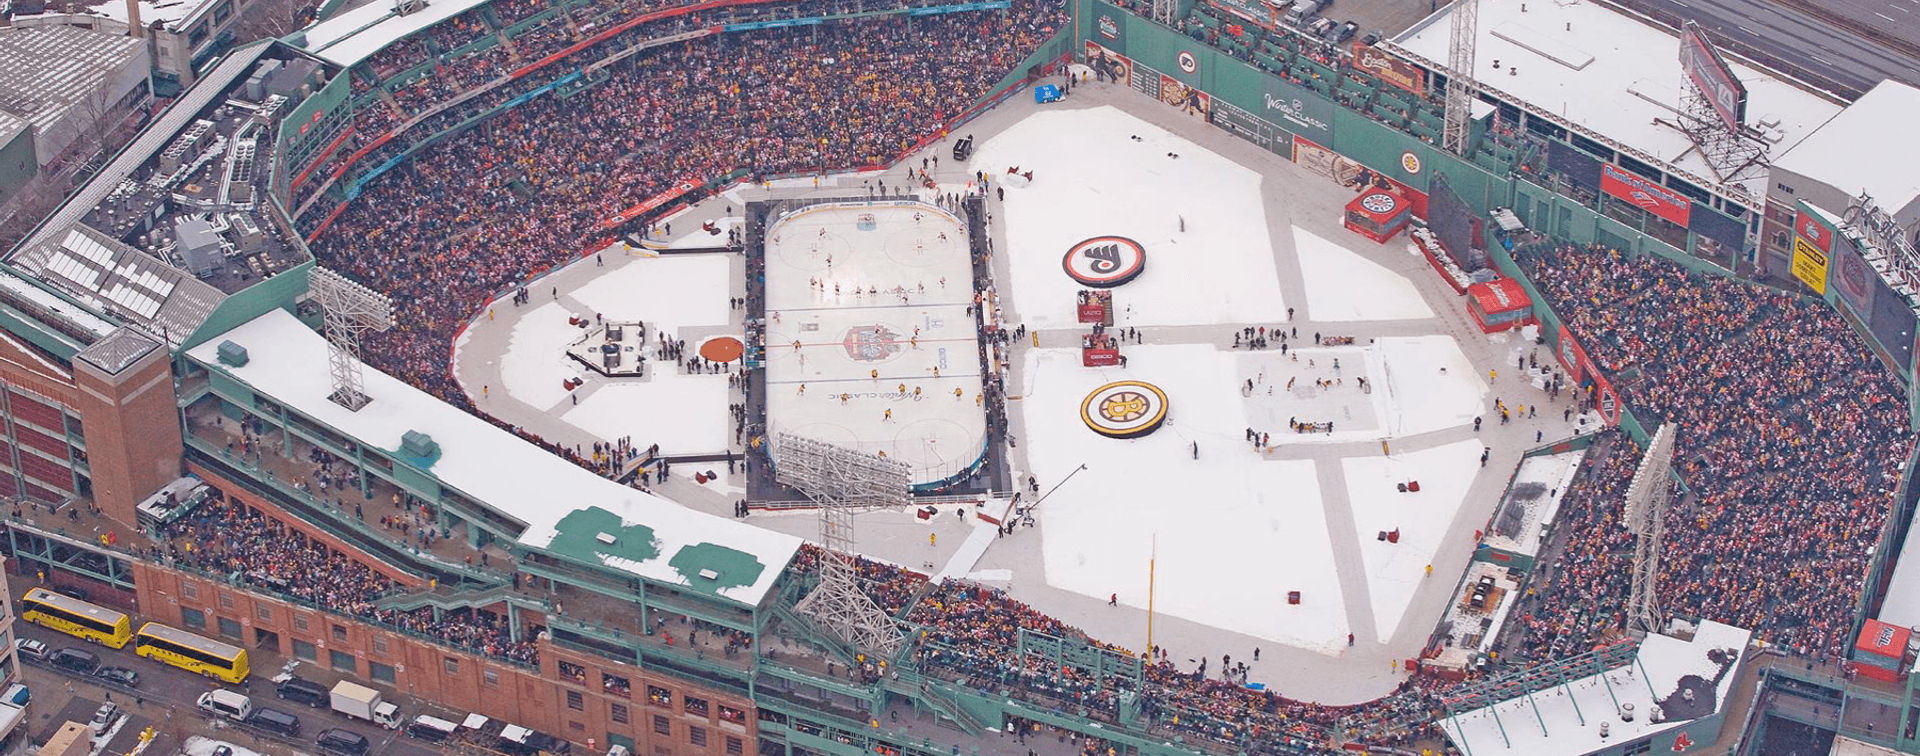 Tickets for Winter Classic at Fenway go on sale Wednesday - Boston